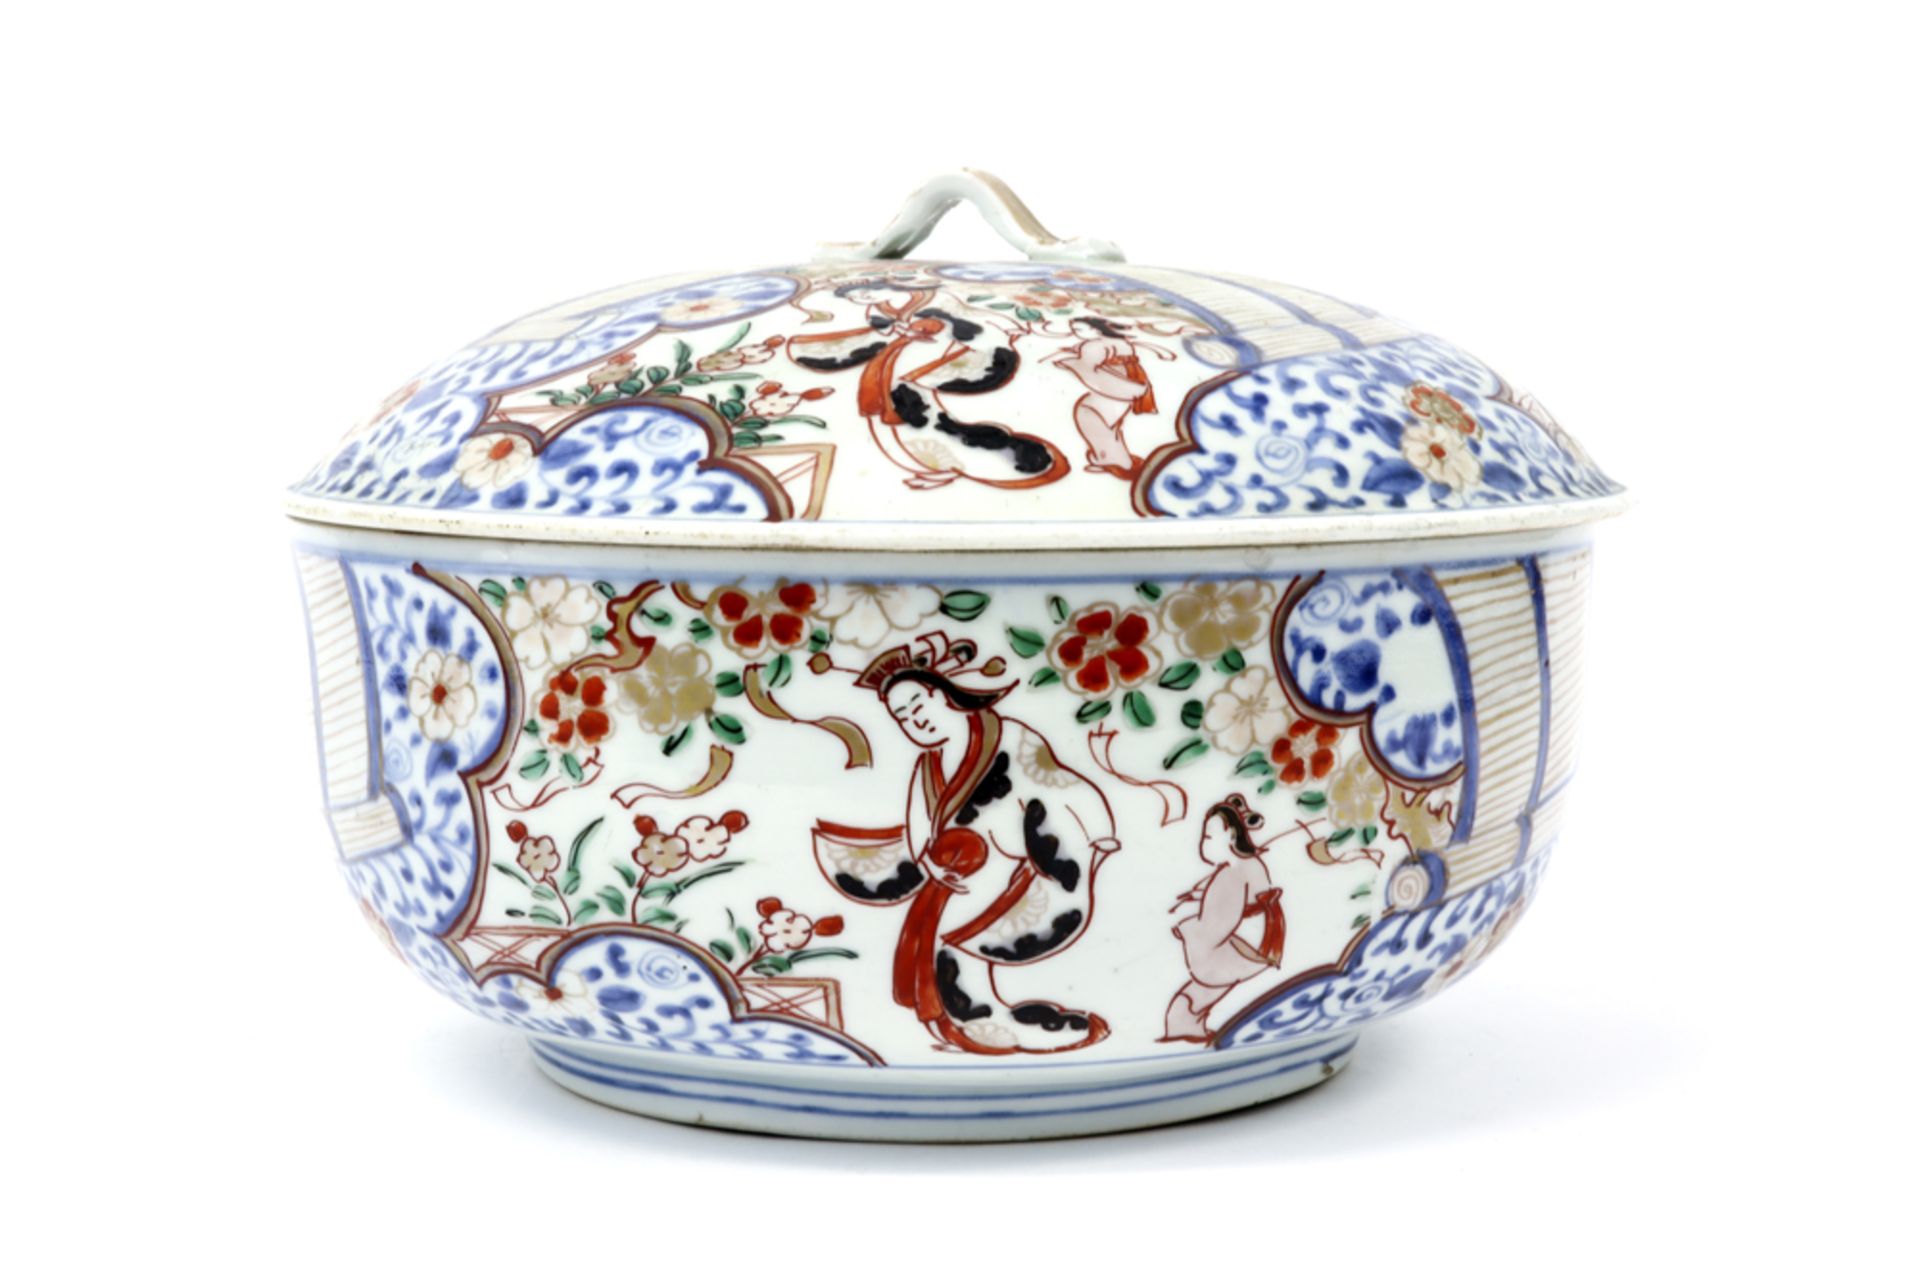 17th/18th Cent. Japanese lidded Arita tureen in porcelain with an Imari decor with female figures ||